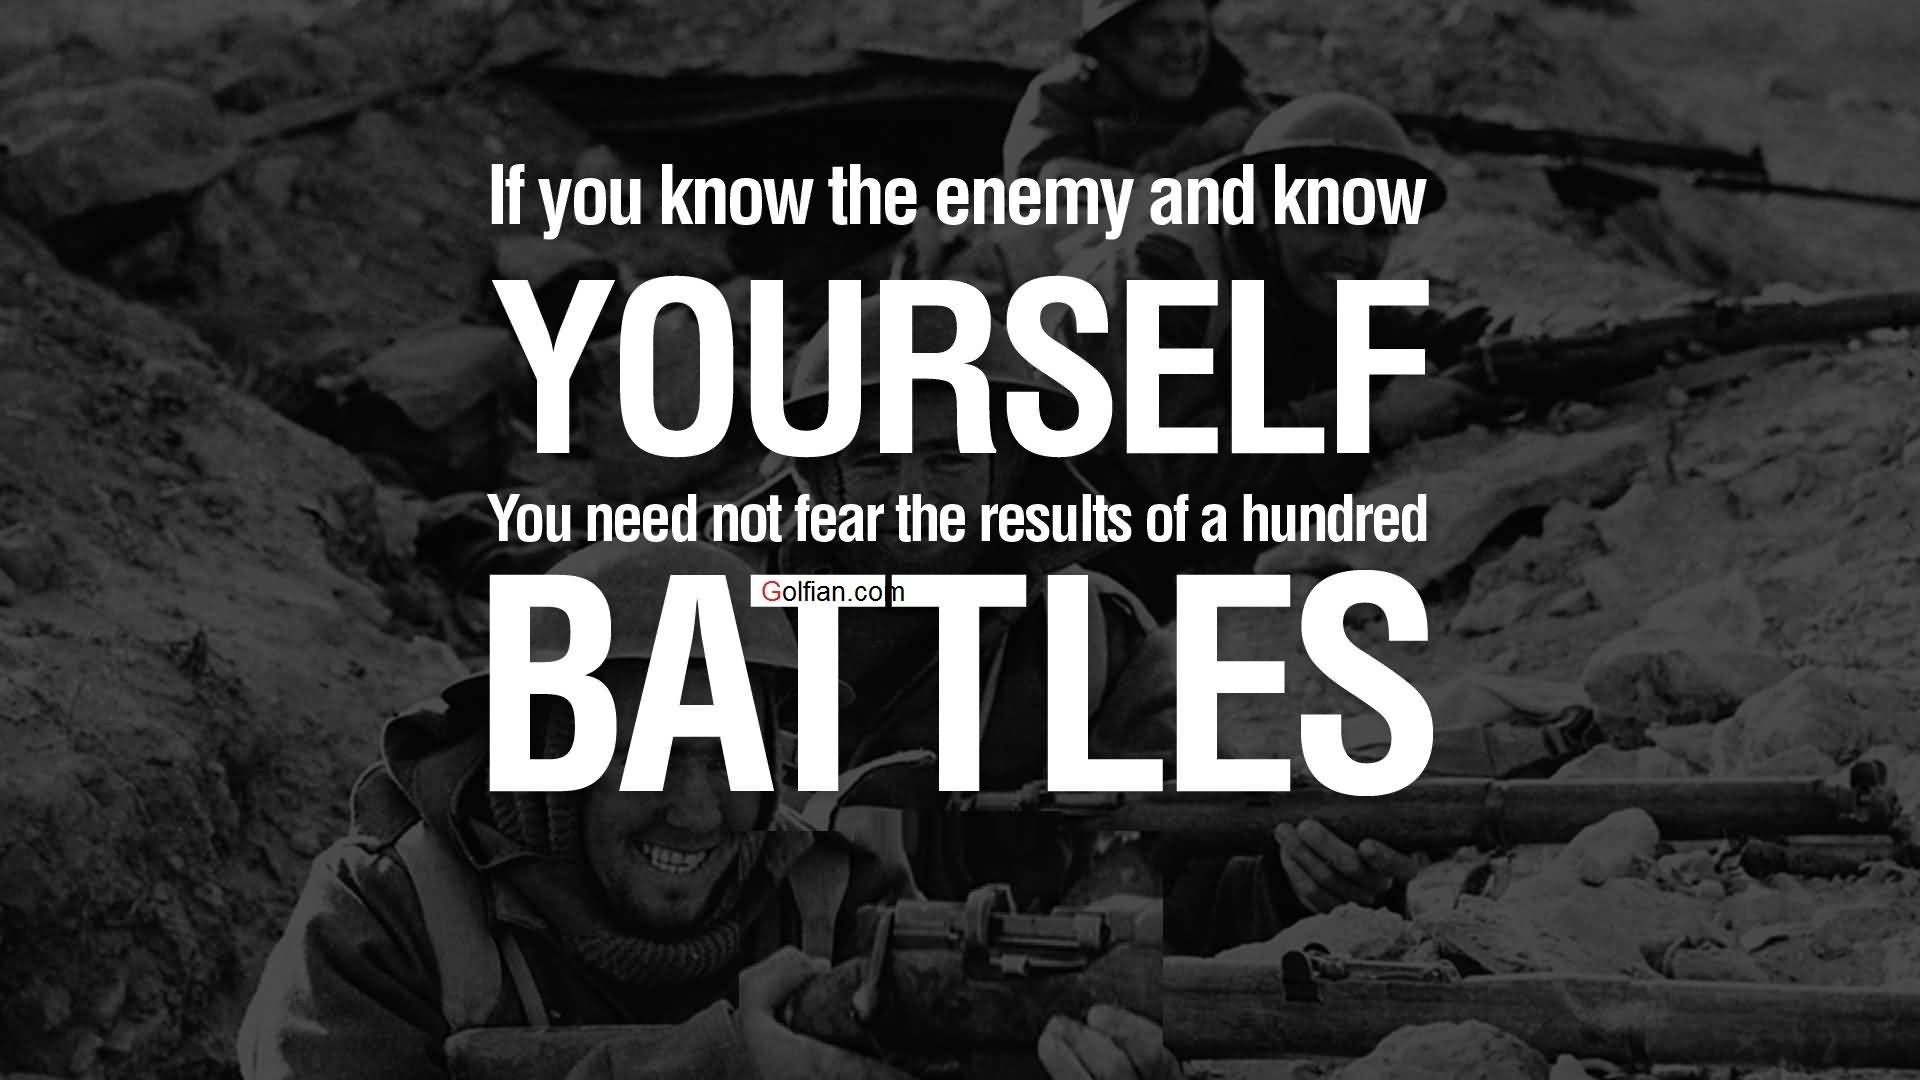 True Enemy Quotes And Sayings